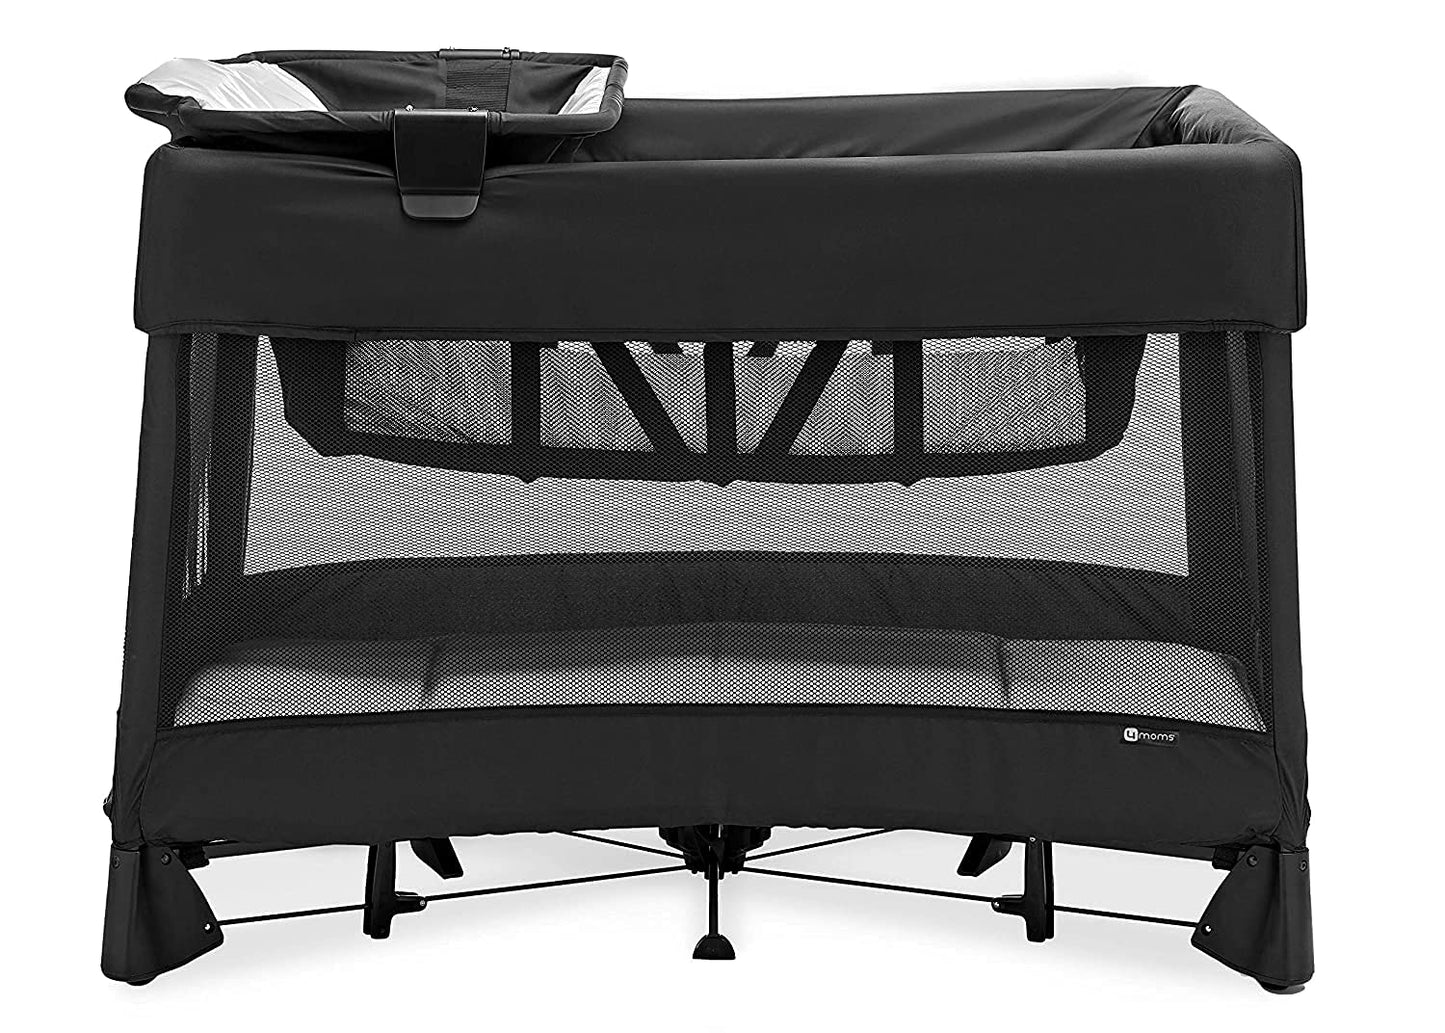 4moms Breeze Plus Portable Playard with Removable Bassinet and Baby Changing Station, Easy One-Handed Setup, from The Makers of The mamaRoo